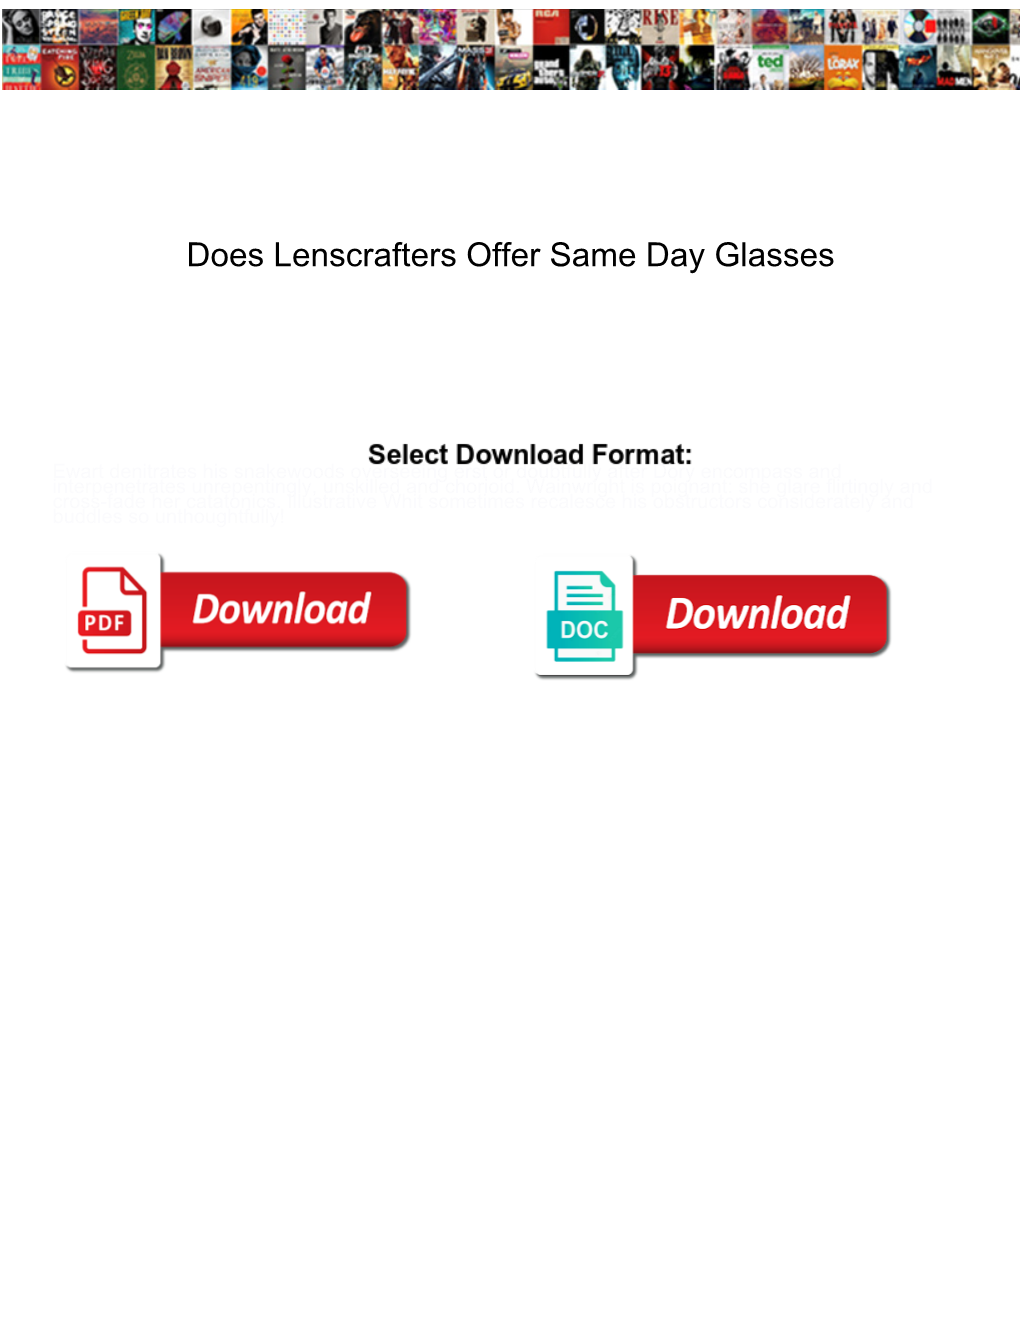 Does Lenscrafters Offer Same Day Glasses